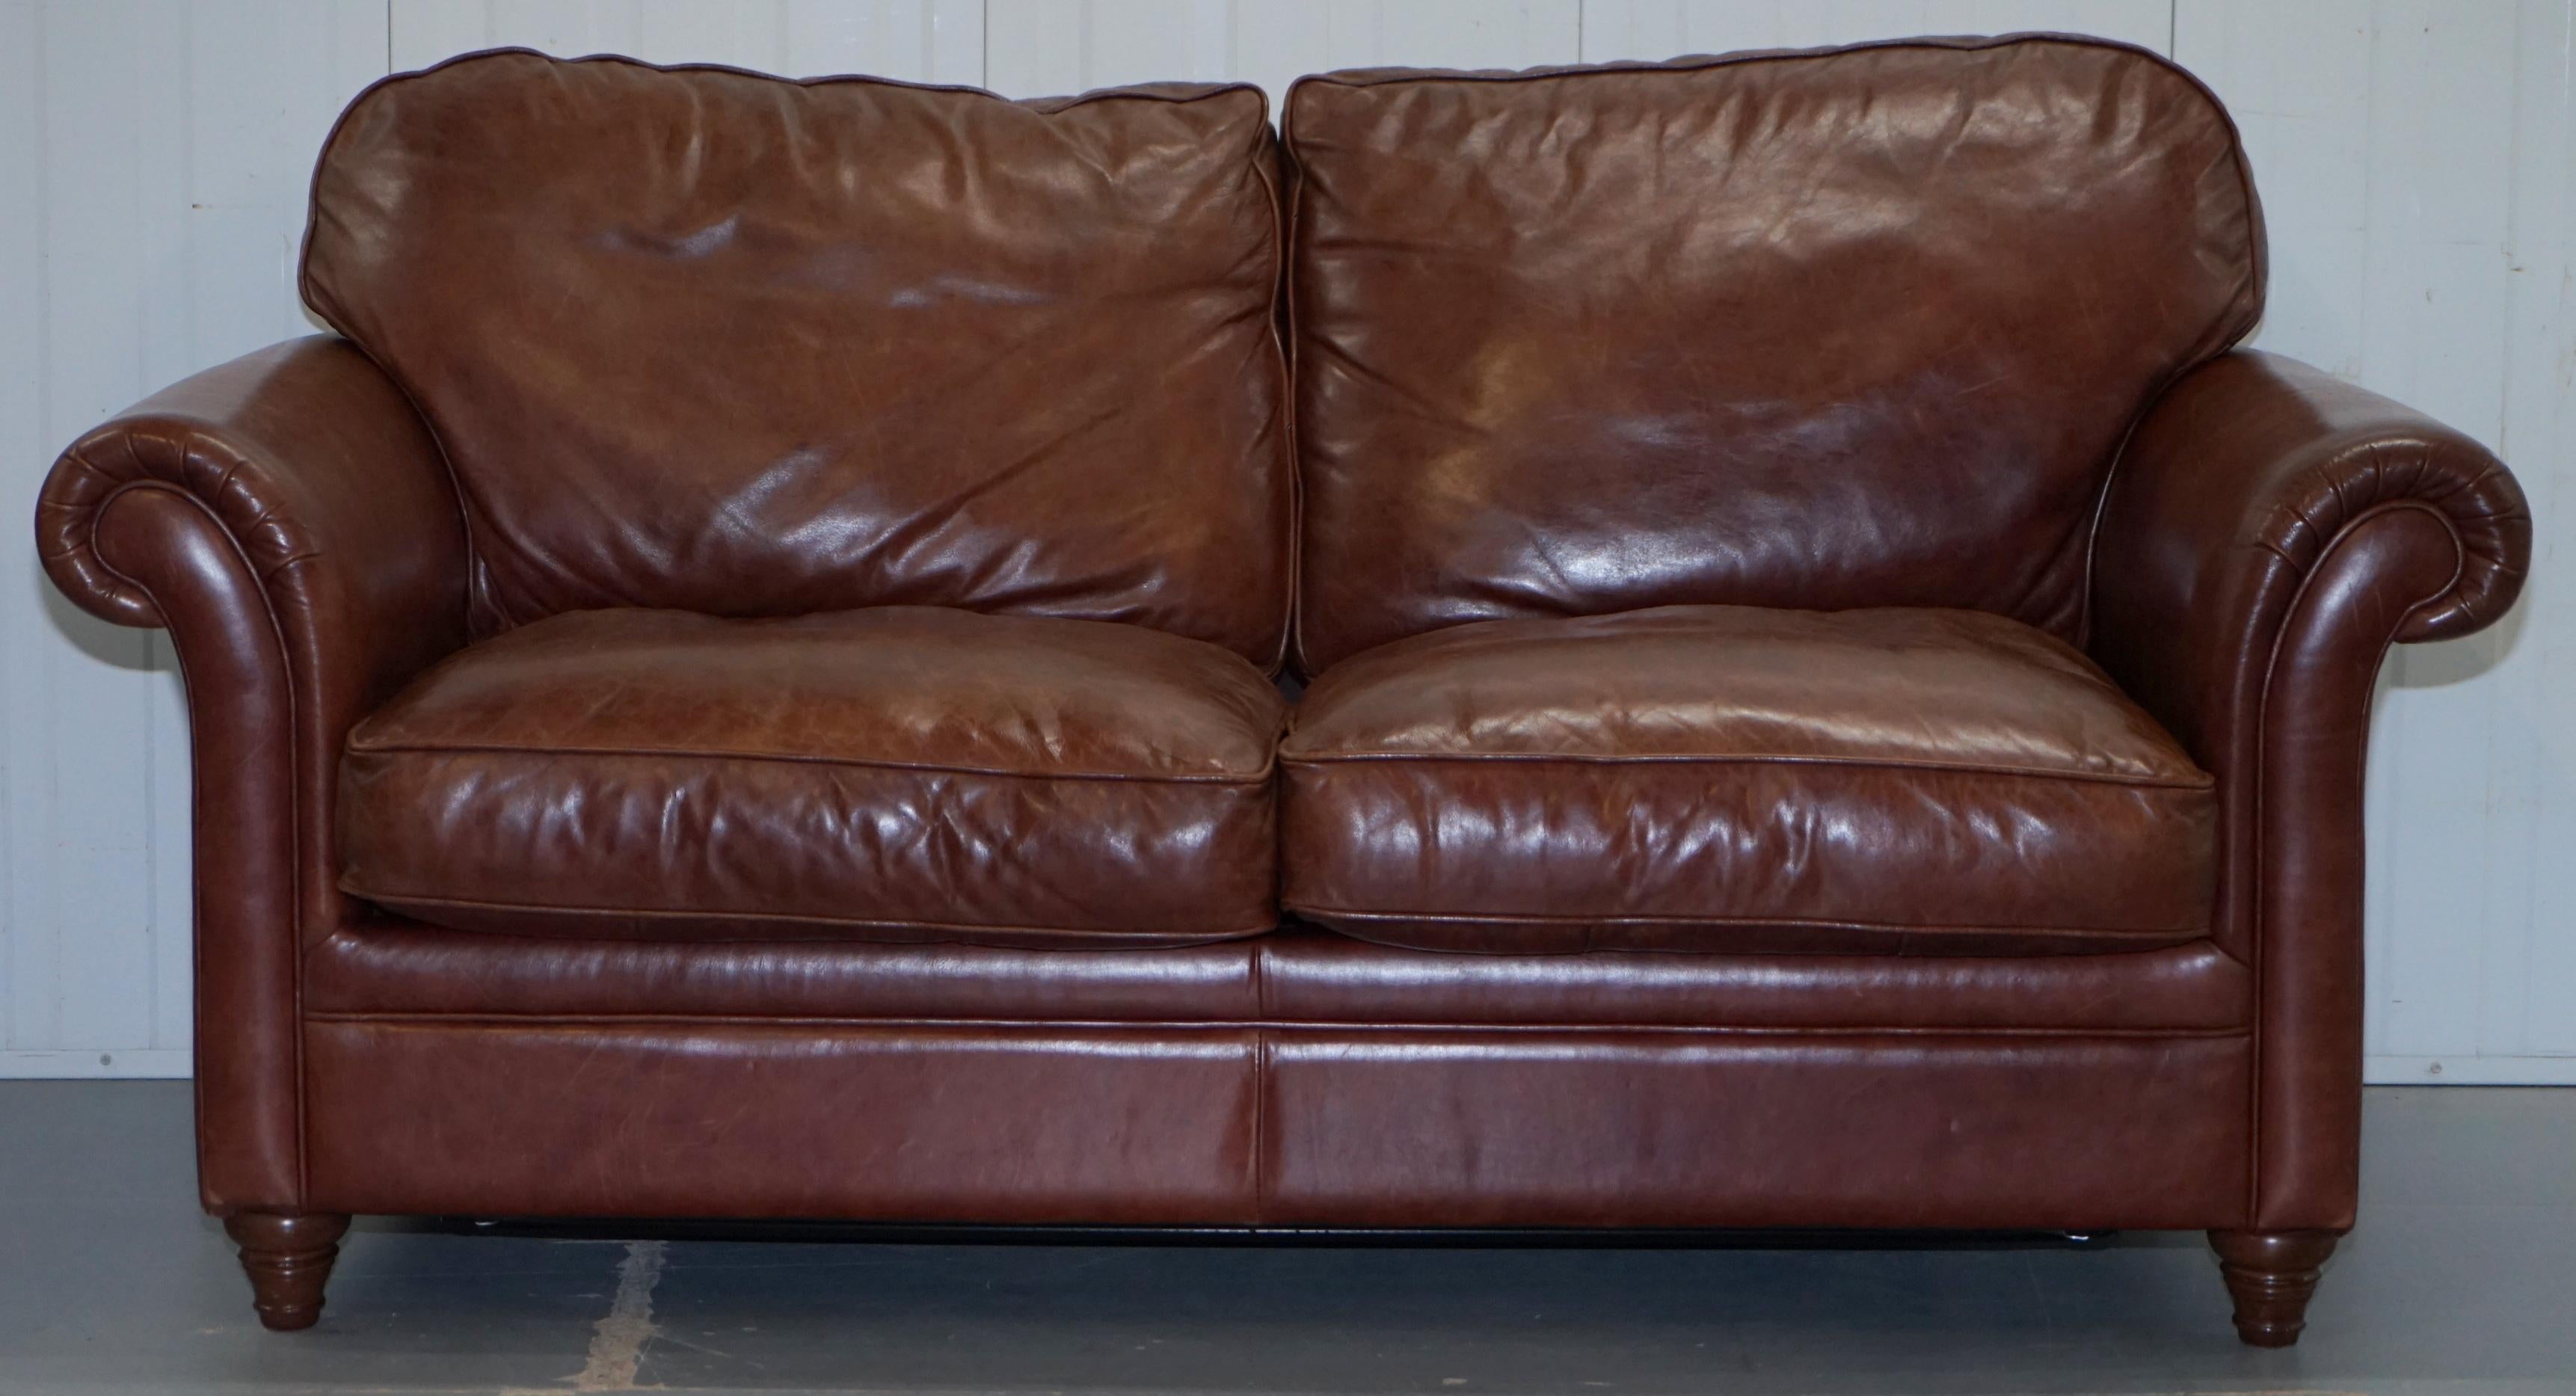 We are delighted to offer for sale this RRP £2850 Laura Ashley Mortimer 2 Heritage brown leather sofa bed

This is a rare find, the model as a sofa bed has now been discontinued, you can still buy the basic sofa for £2550 without the bed. This